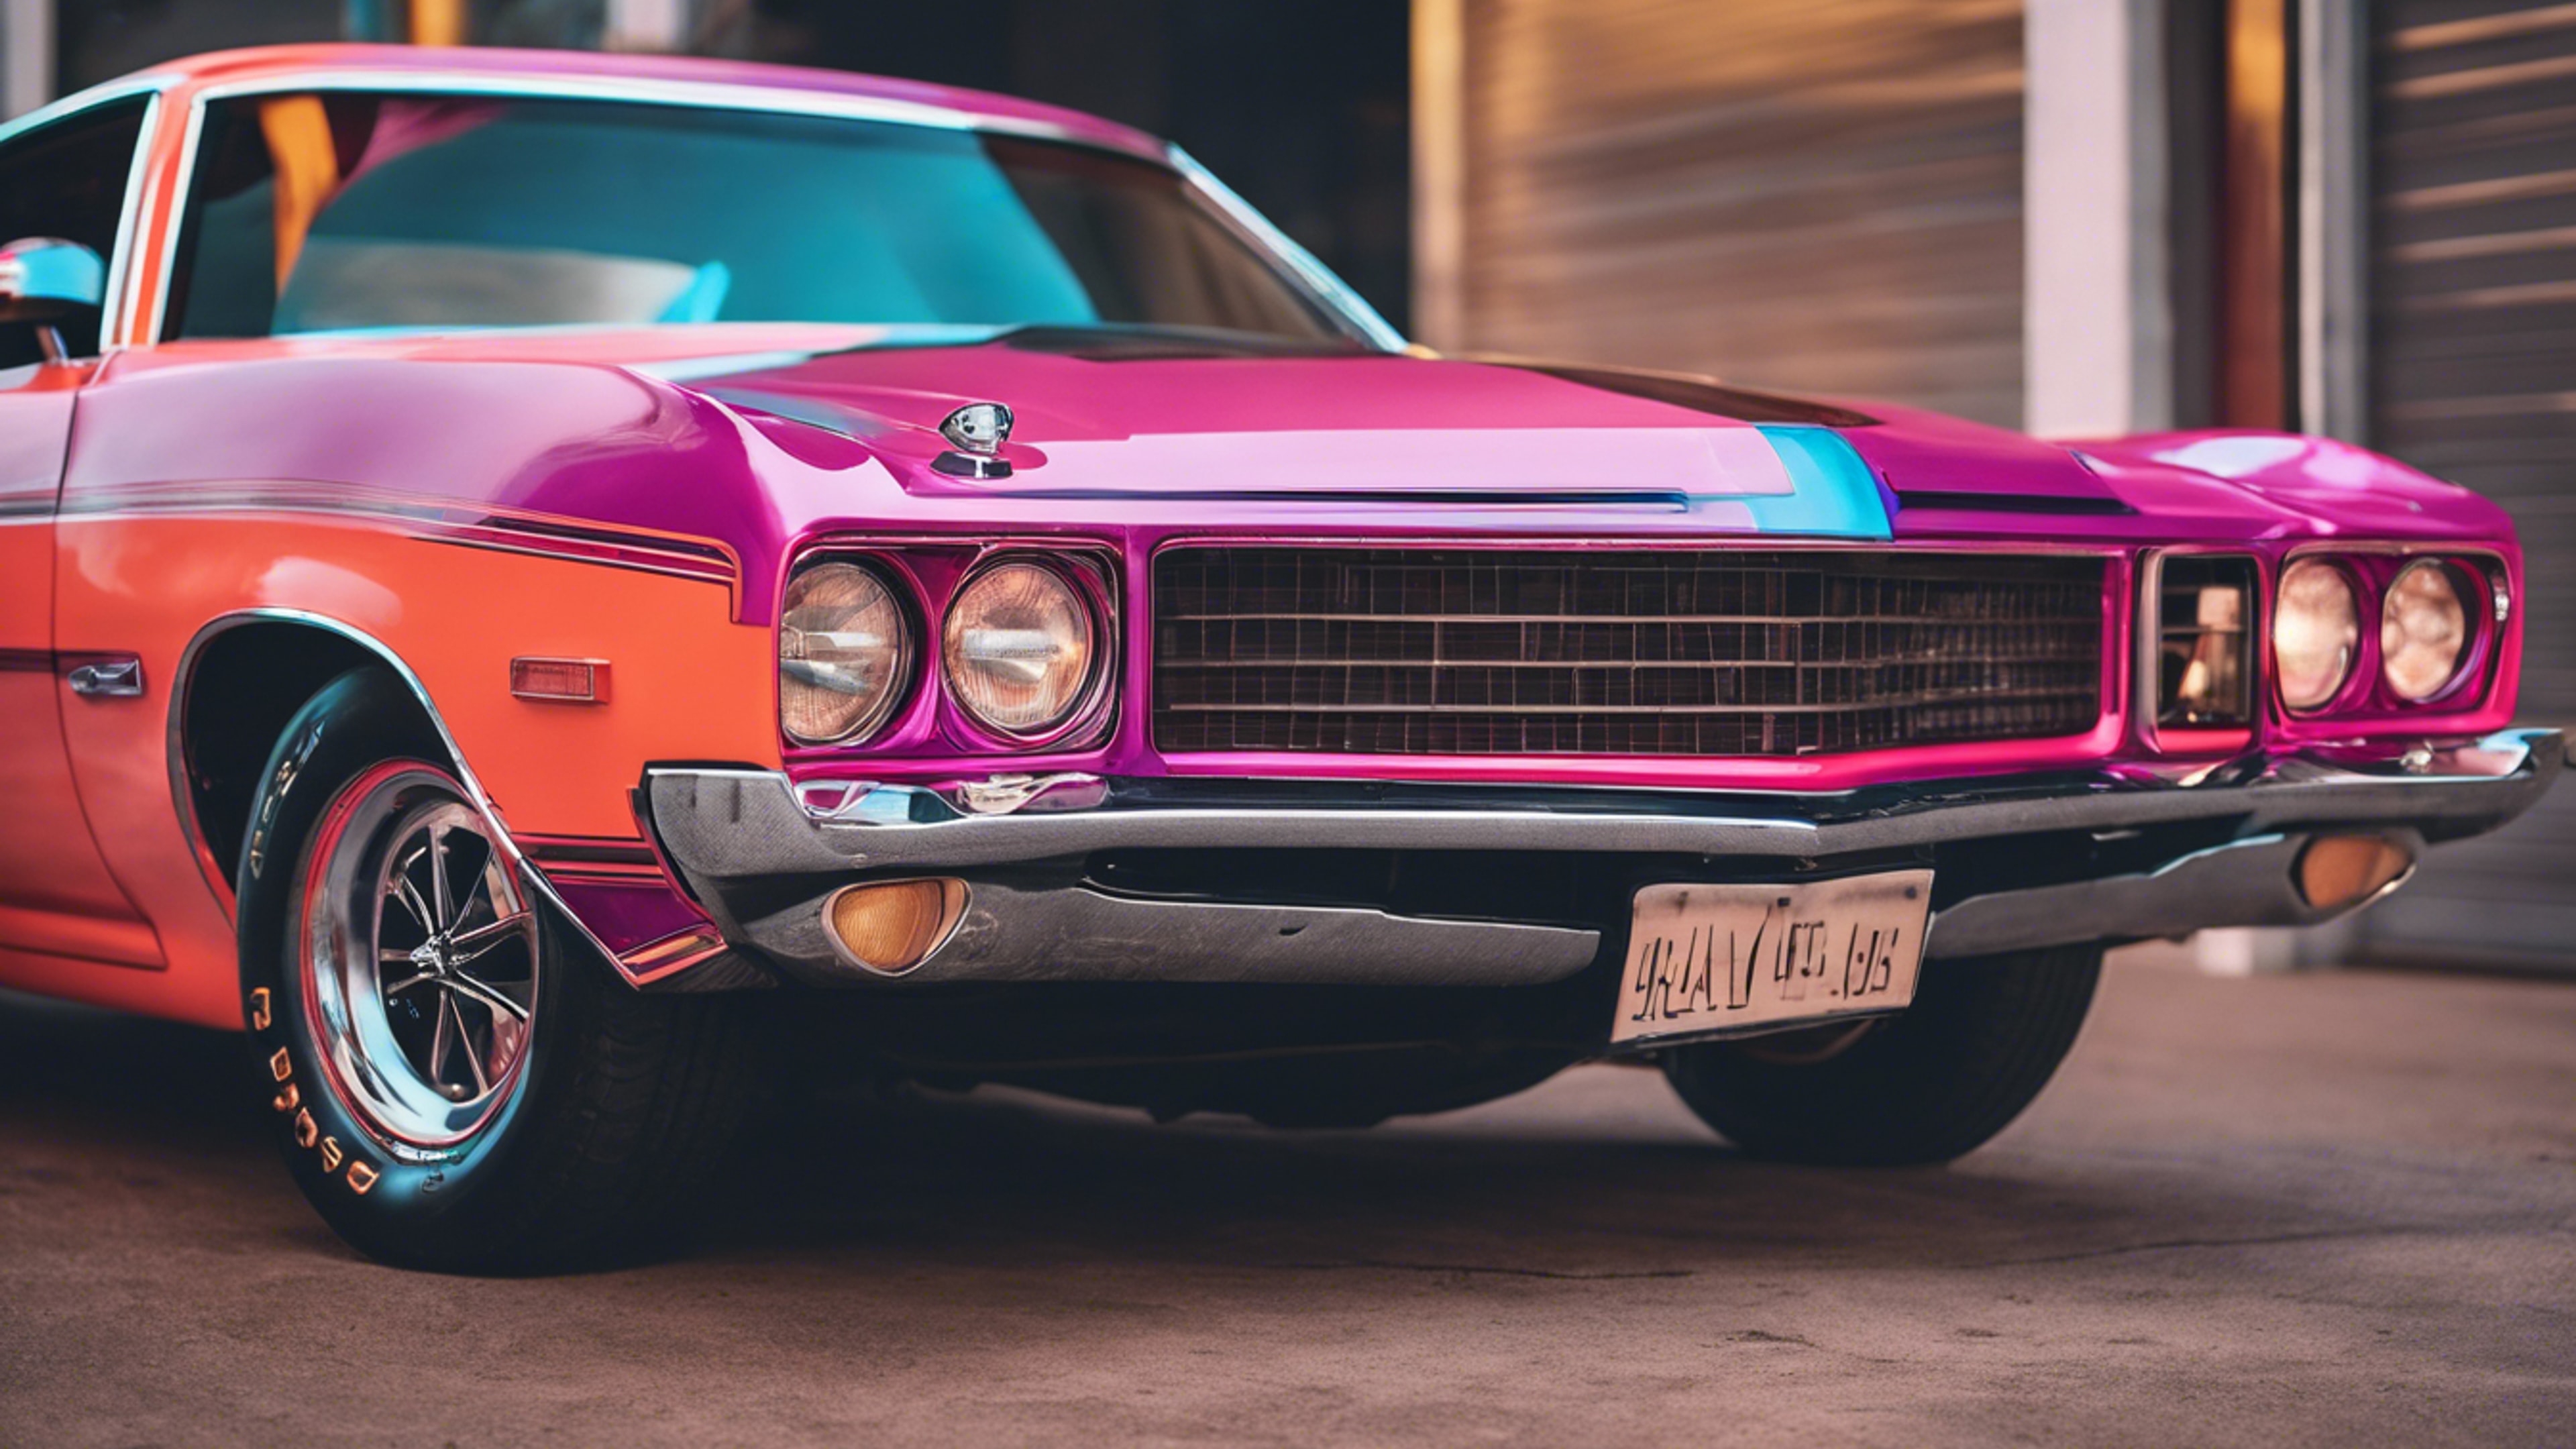 A classic American muscle car from the 1970s, printed in bright neon colors Tapeta[fa60d4cf89e348ffade4]